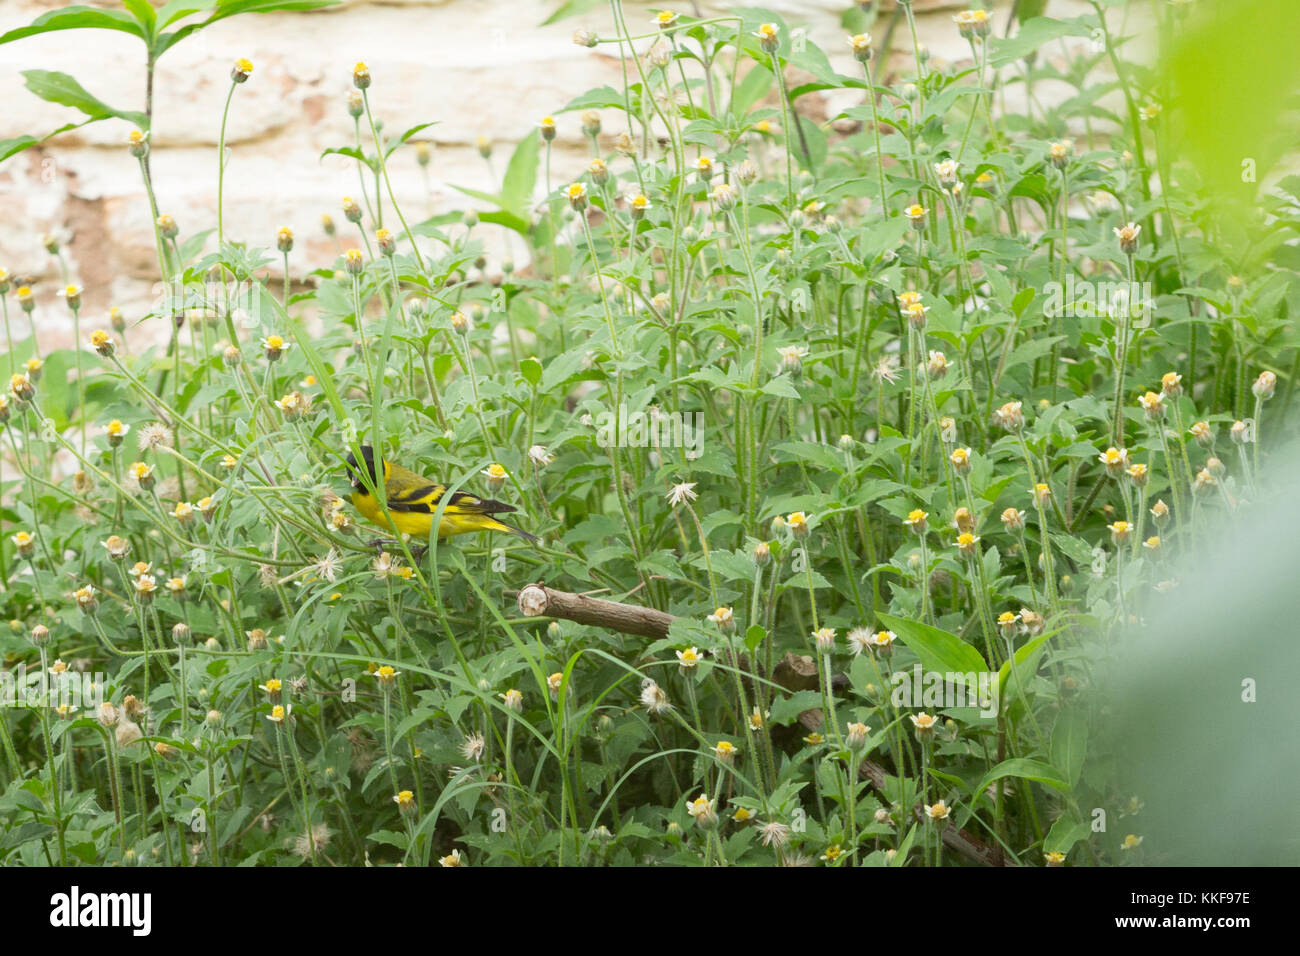 Asuncion, Paraguay. 6th Dec, 2017. A male hooded siskin (Spinus magellanicus) small passerine bird feeds on wild flowers in backyard during cloudy day in Asuncion, Paraguay. Credit: Andre M. Chang/ARDUOPRESS/Alamy Live News Stock Photo